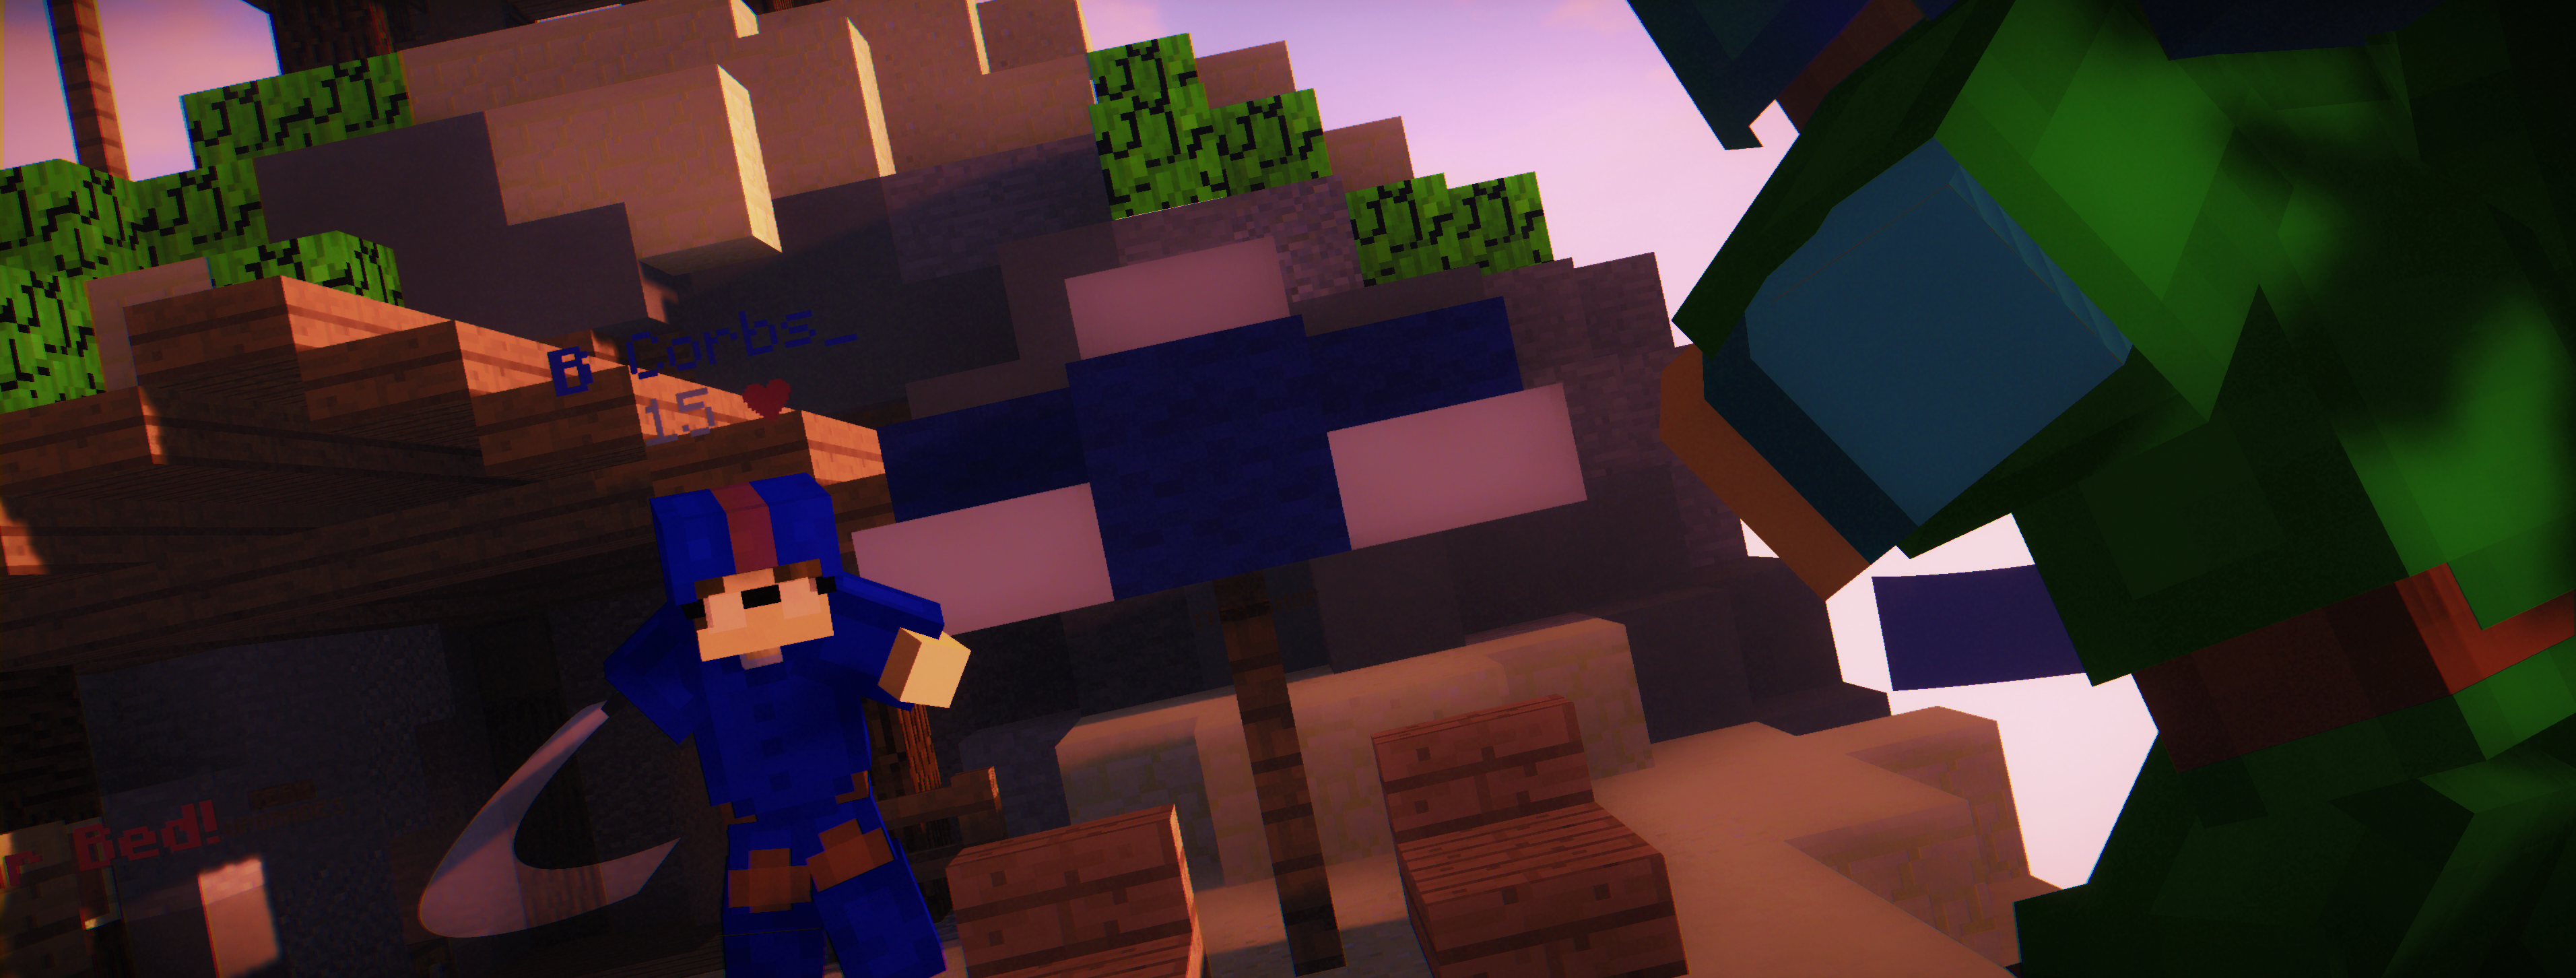 Minecraft Players Video Games Fighting Screen Shot 3825x1452